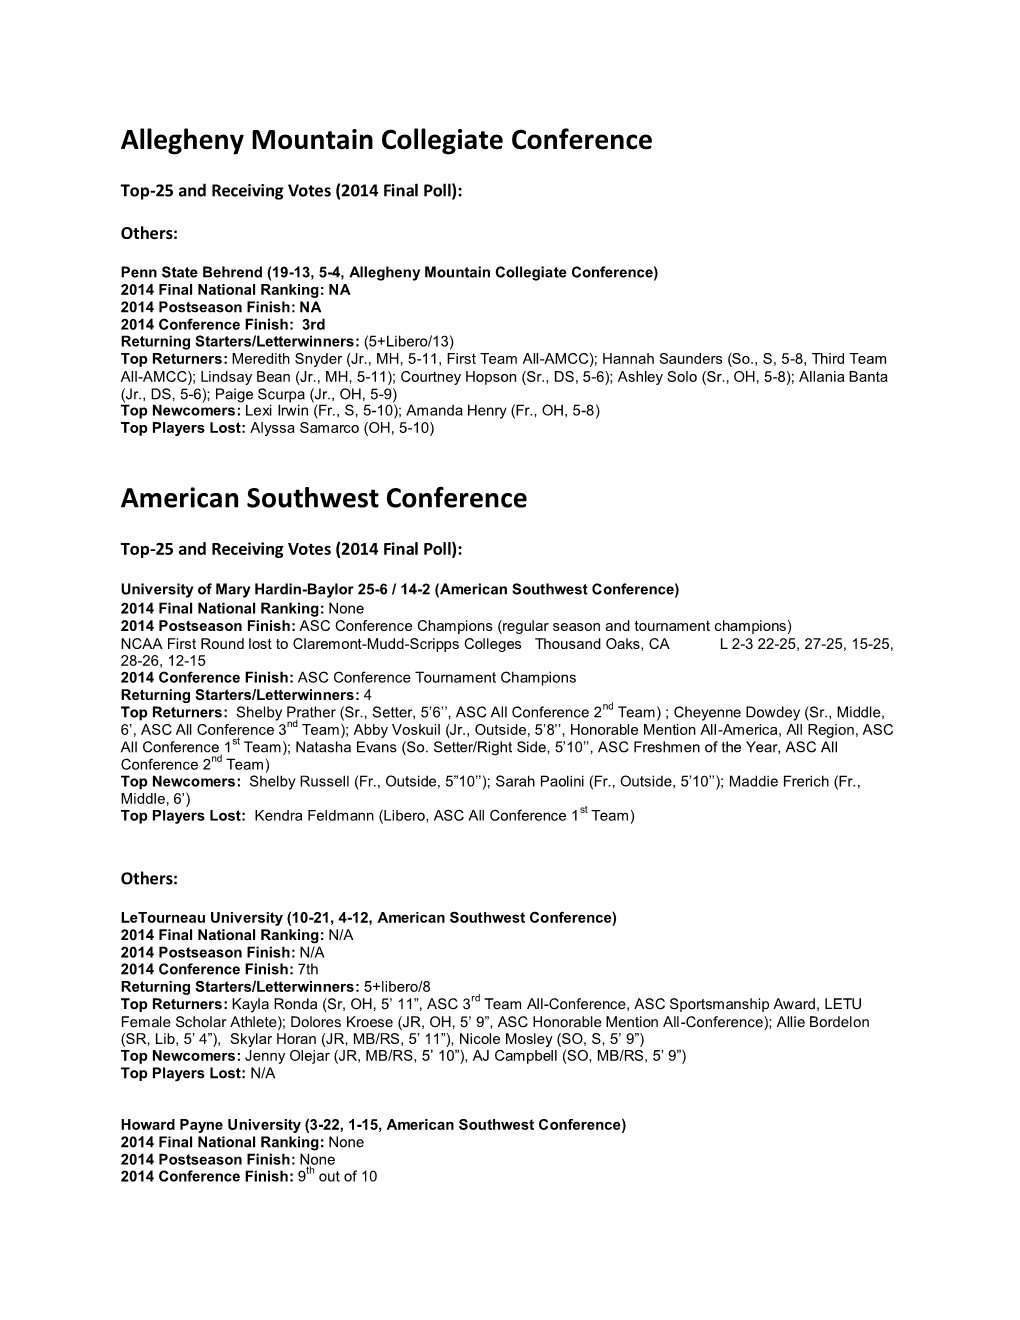 Allegheny Mountain Collegiate Conference American Southwest